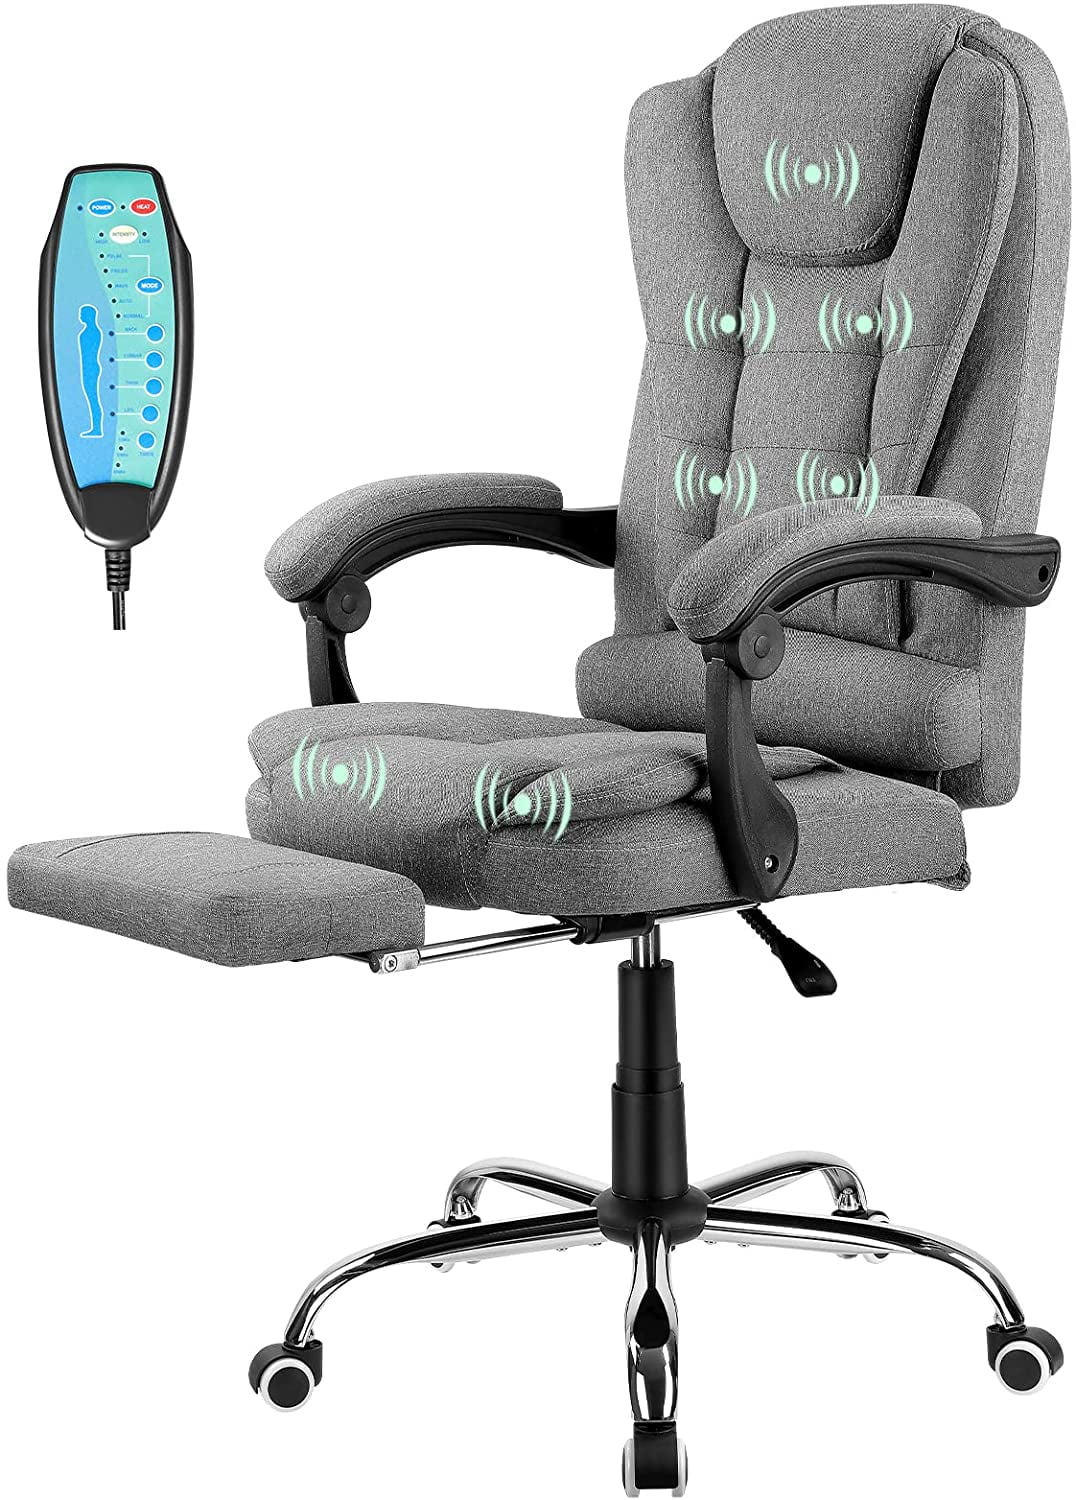 6 Point Racing Game Massage Chair Leather Ergonomic Computer Office Chair White 